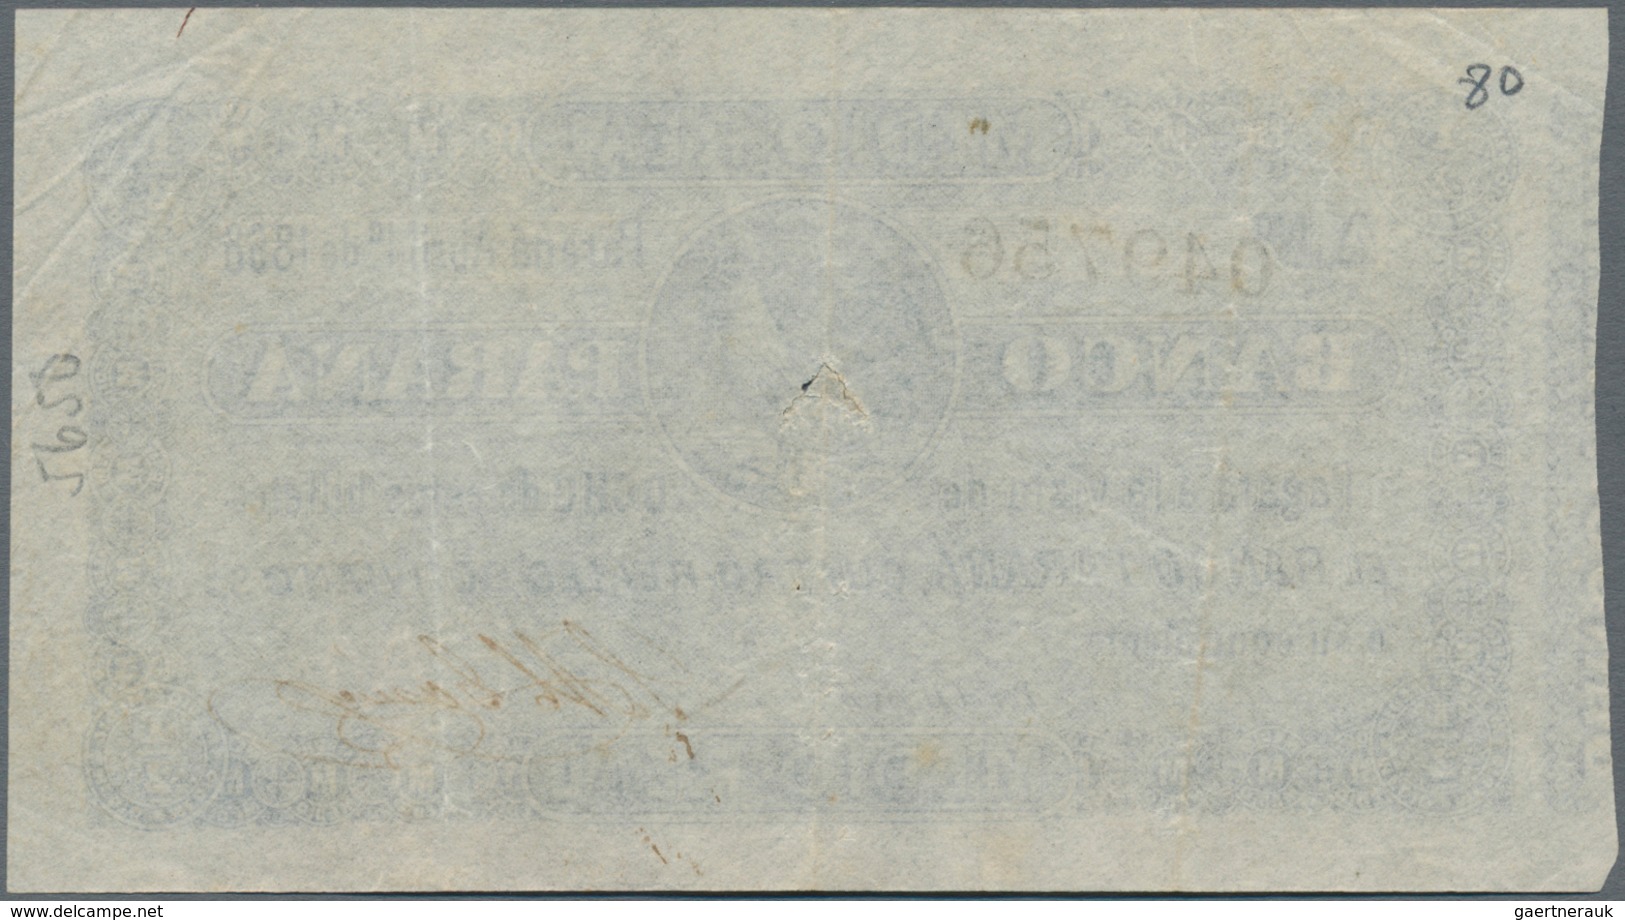 Argentina / Argentinien: Banco Parana 1/2 Real 1868, P.S1811a, Small Tear At Center, Some Folds. Con - Argentinië